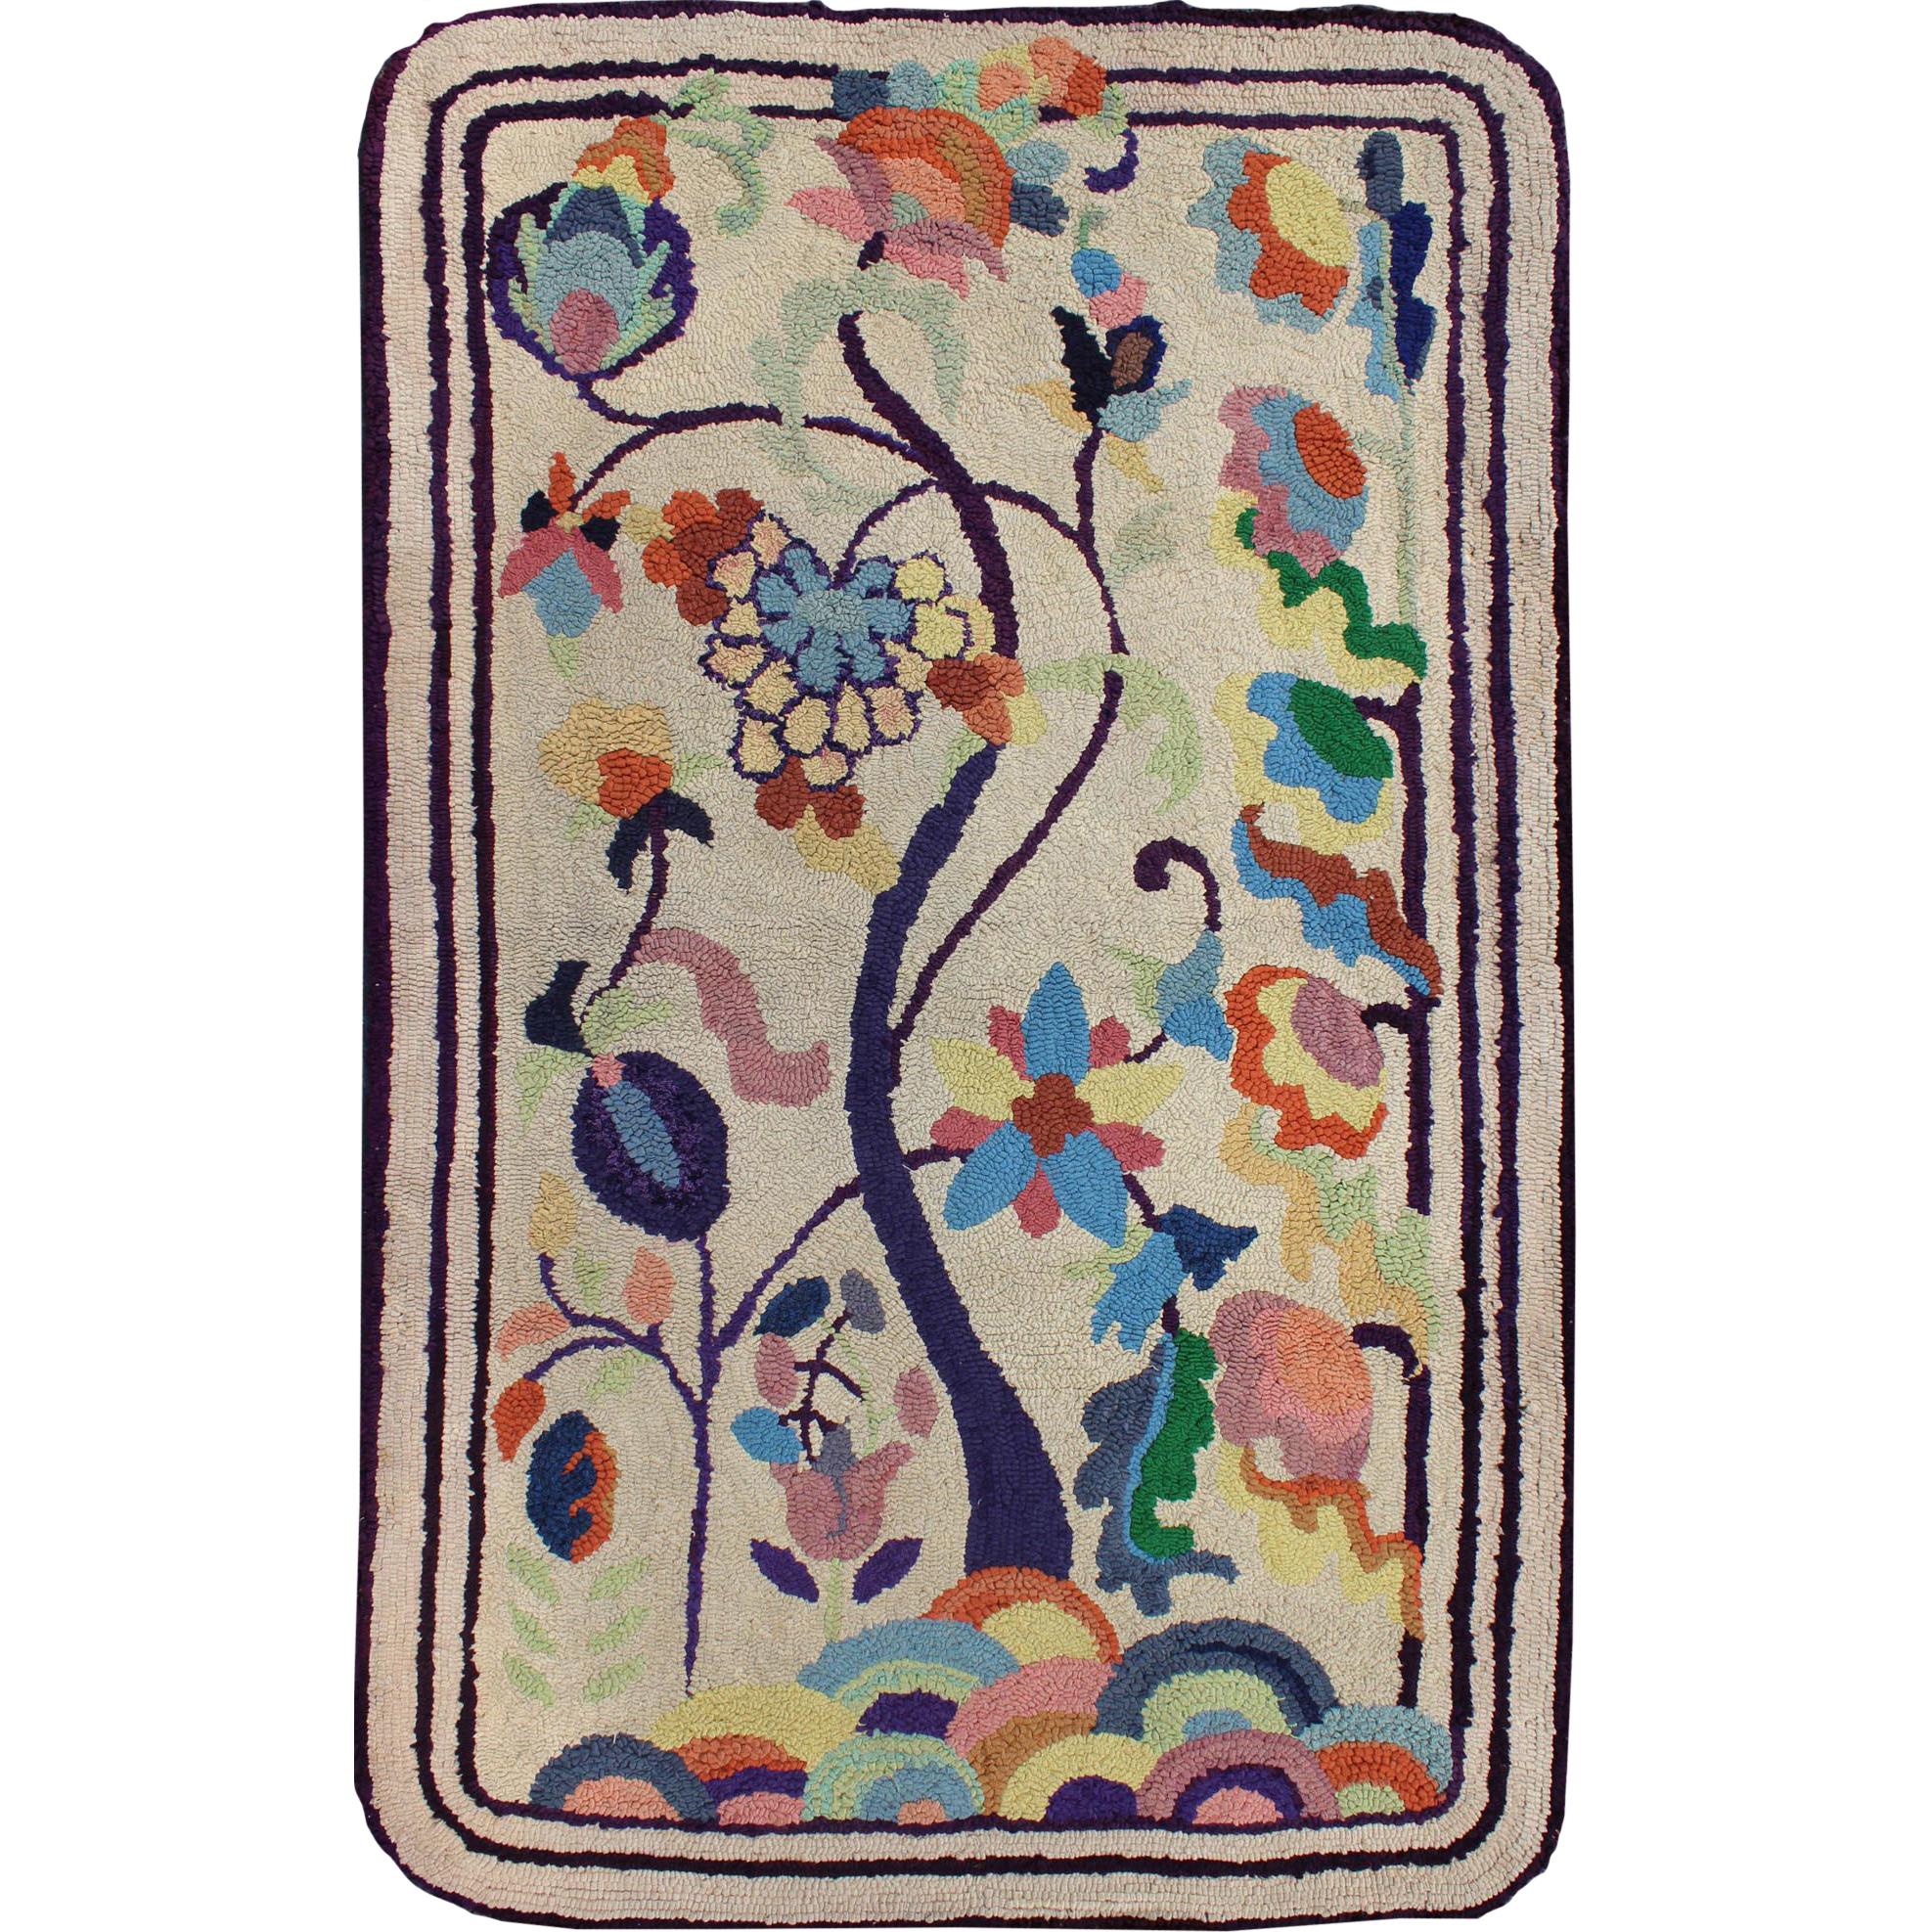 Colorful Vintage American Hooked Rug with Branching Rainbow-Colored Flowers For Sale